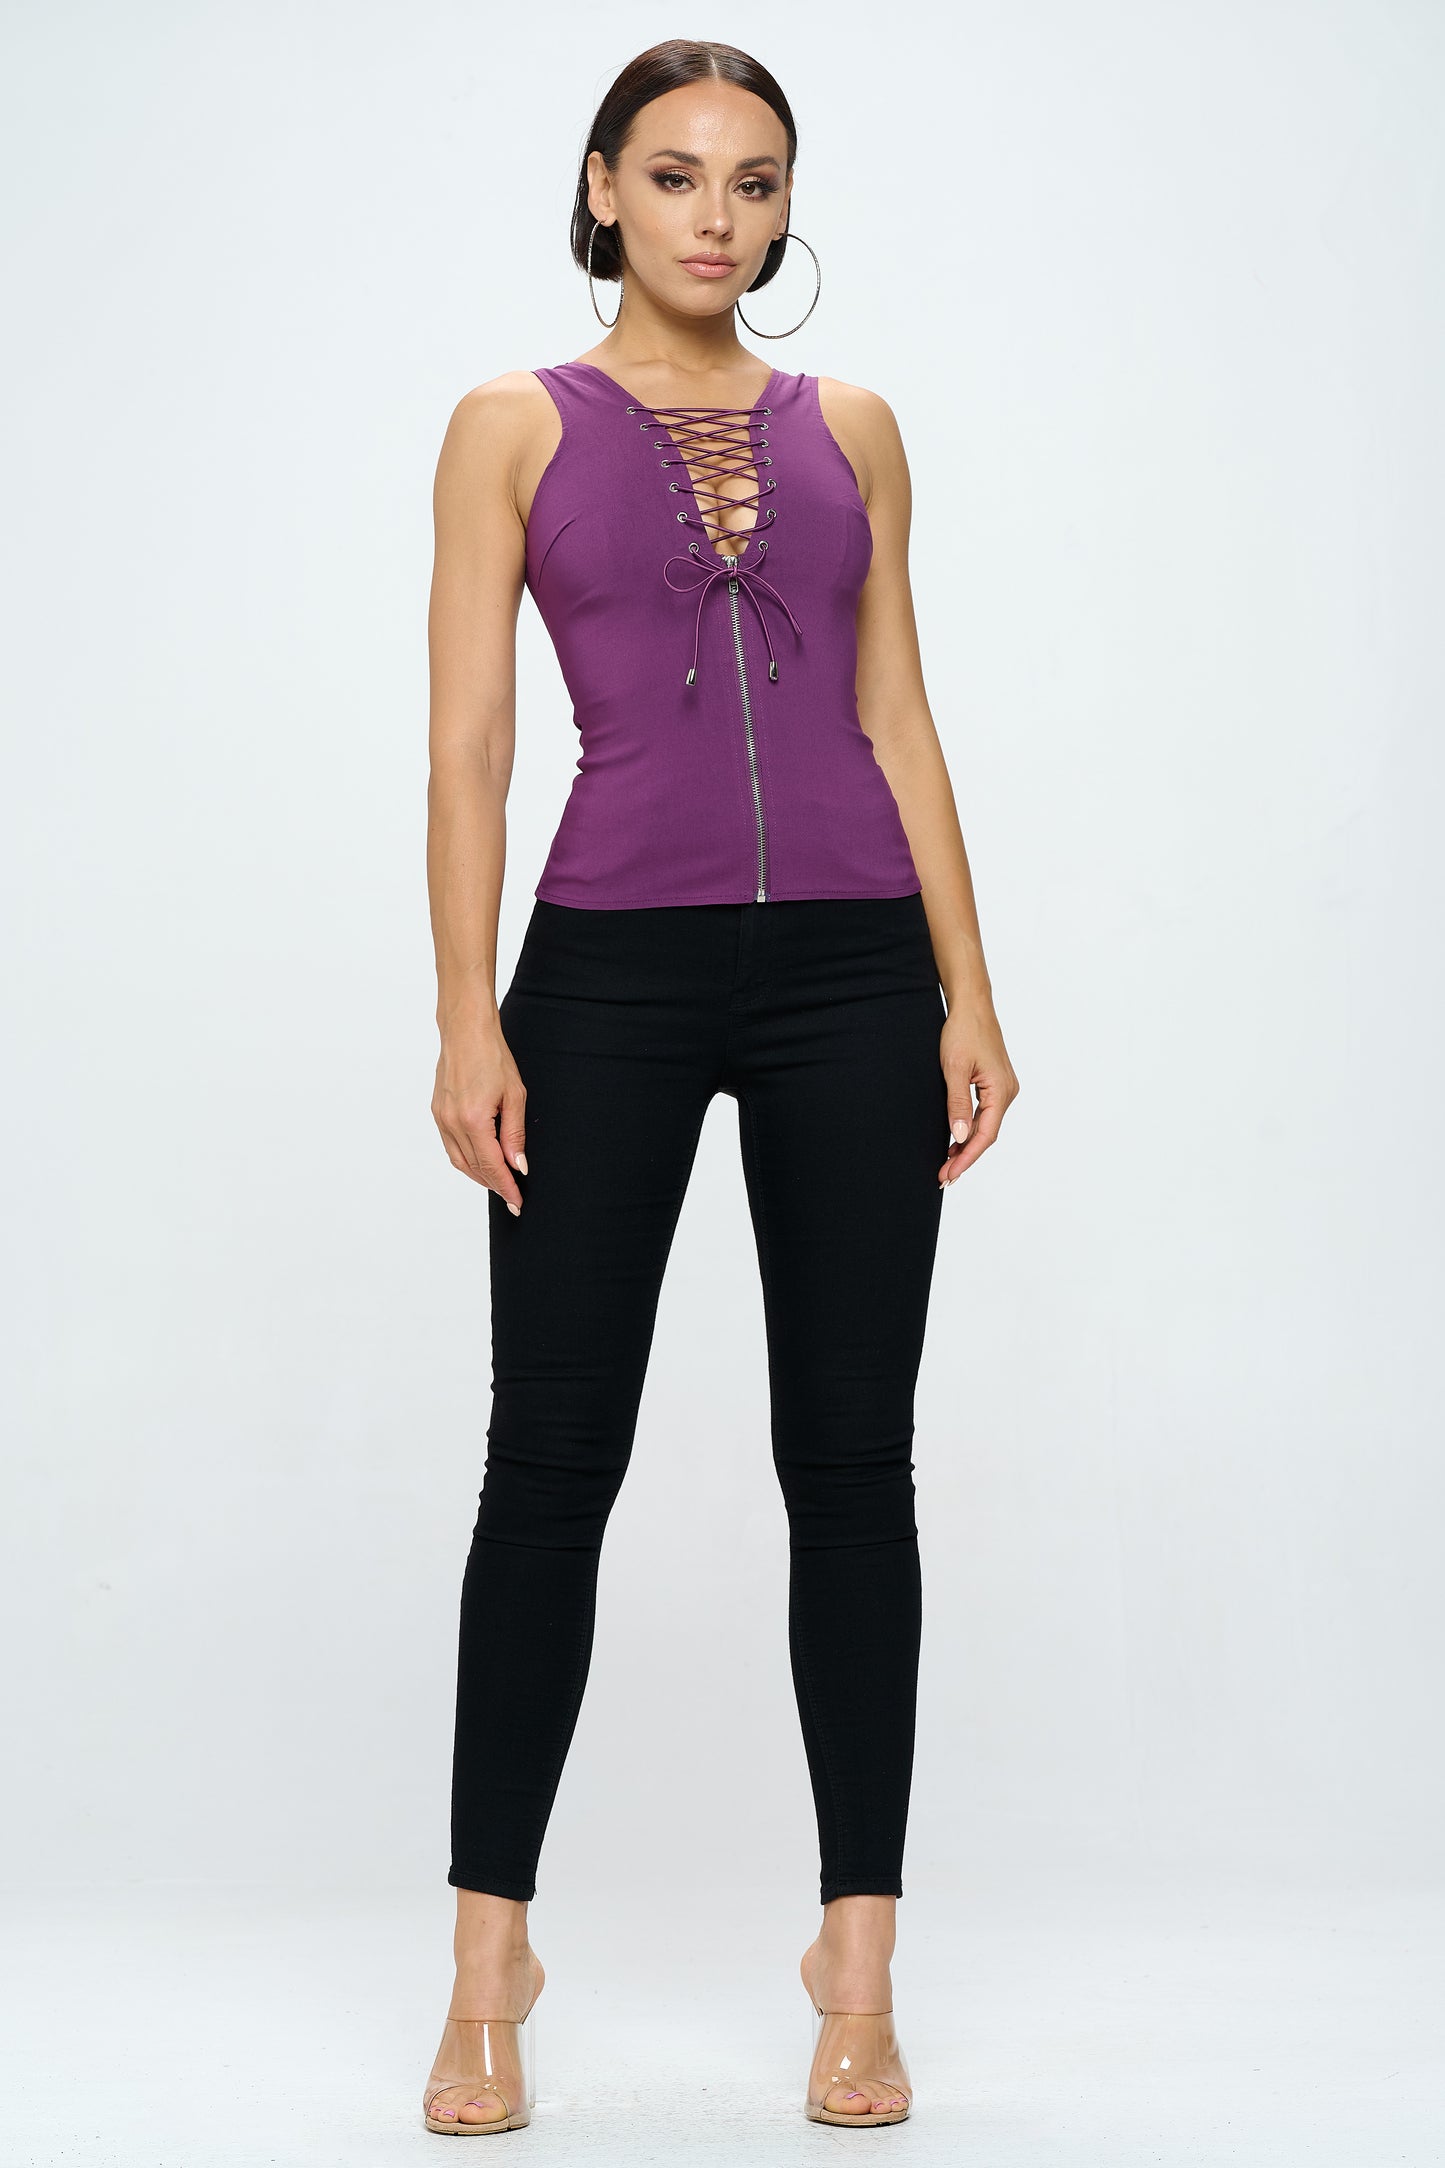 LACE-UP FRONT DETAIL CROSS HATCH BACK TANK TOP